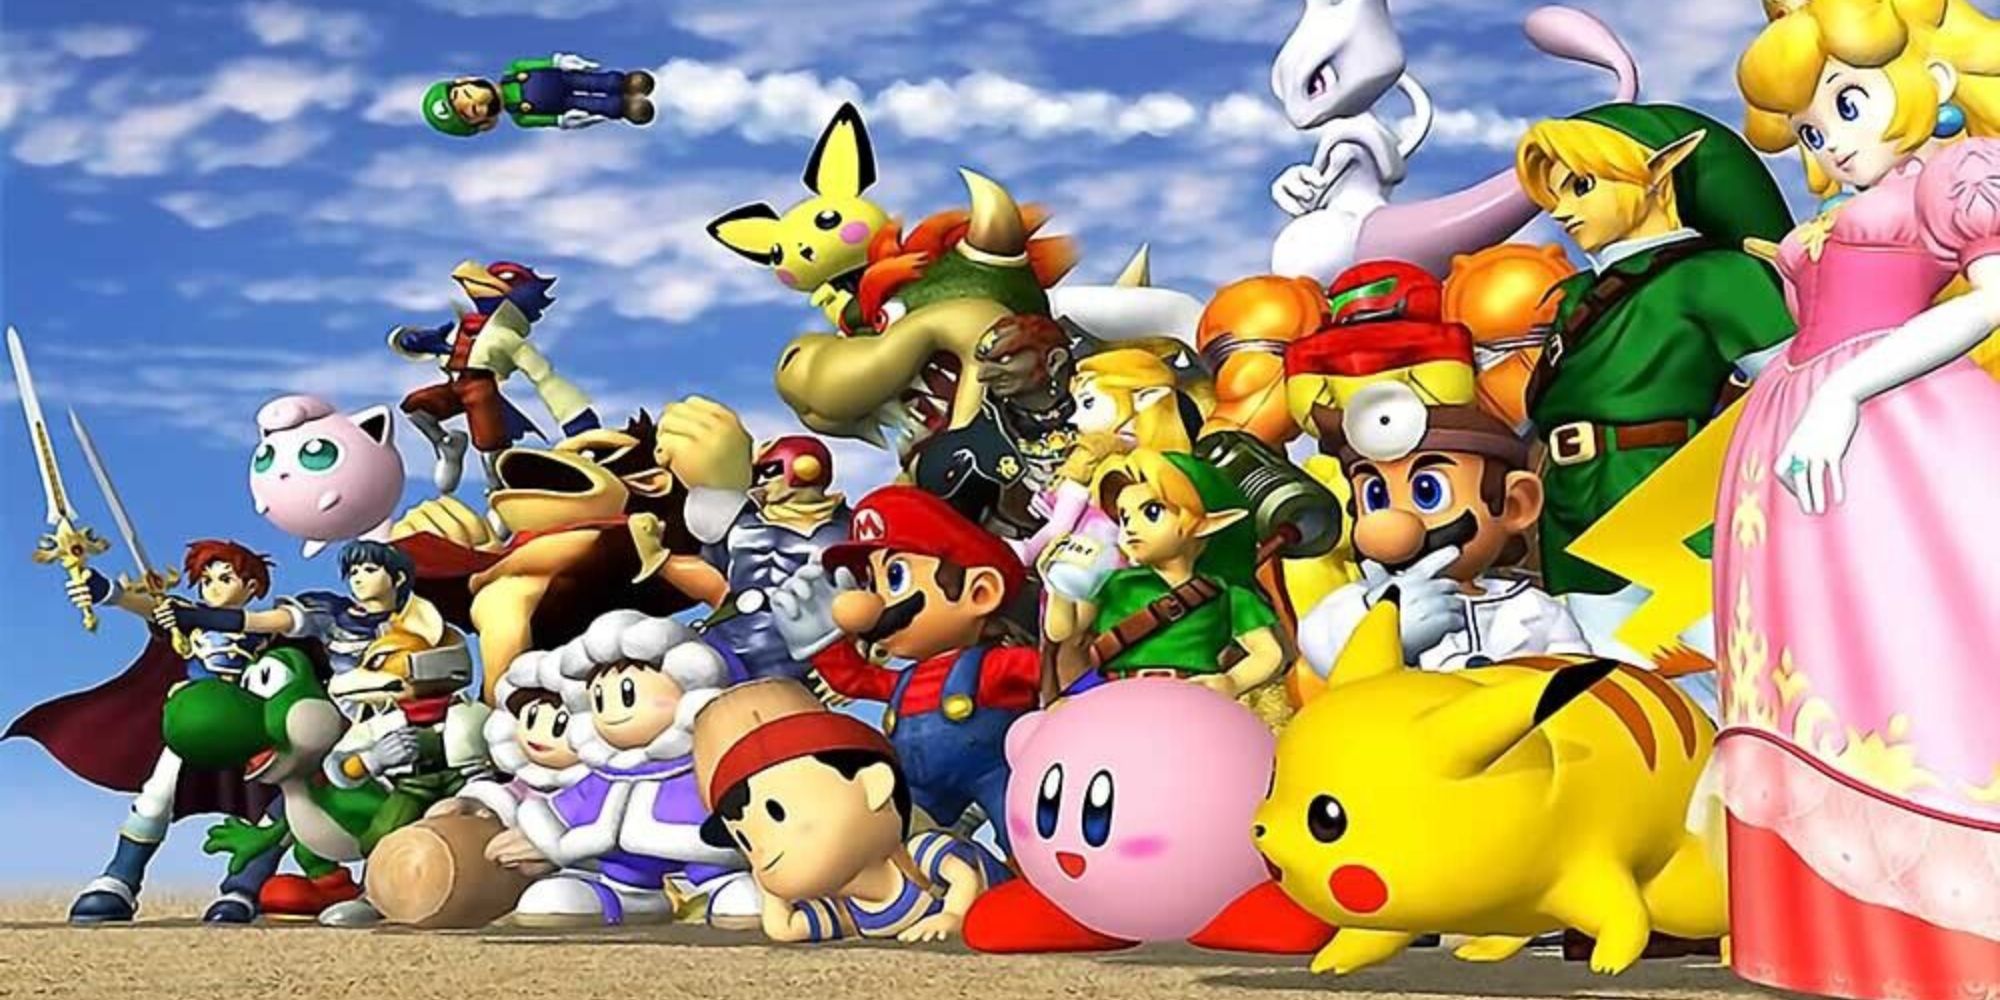 Over two dozen Nintendo characters including Mario, Link, Kirby, Pikachu, and more all stood in a line